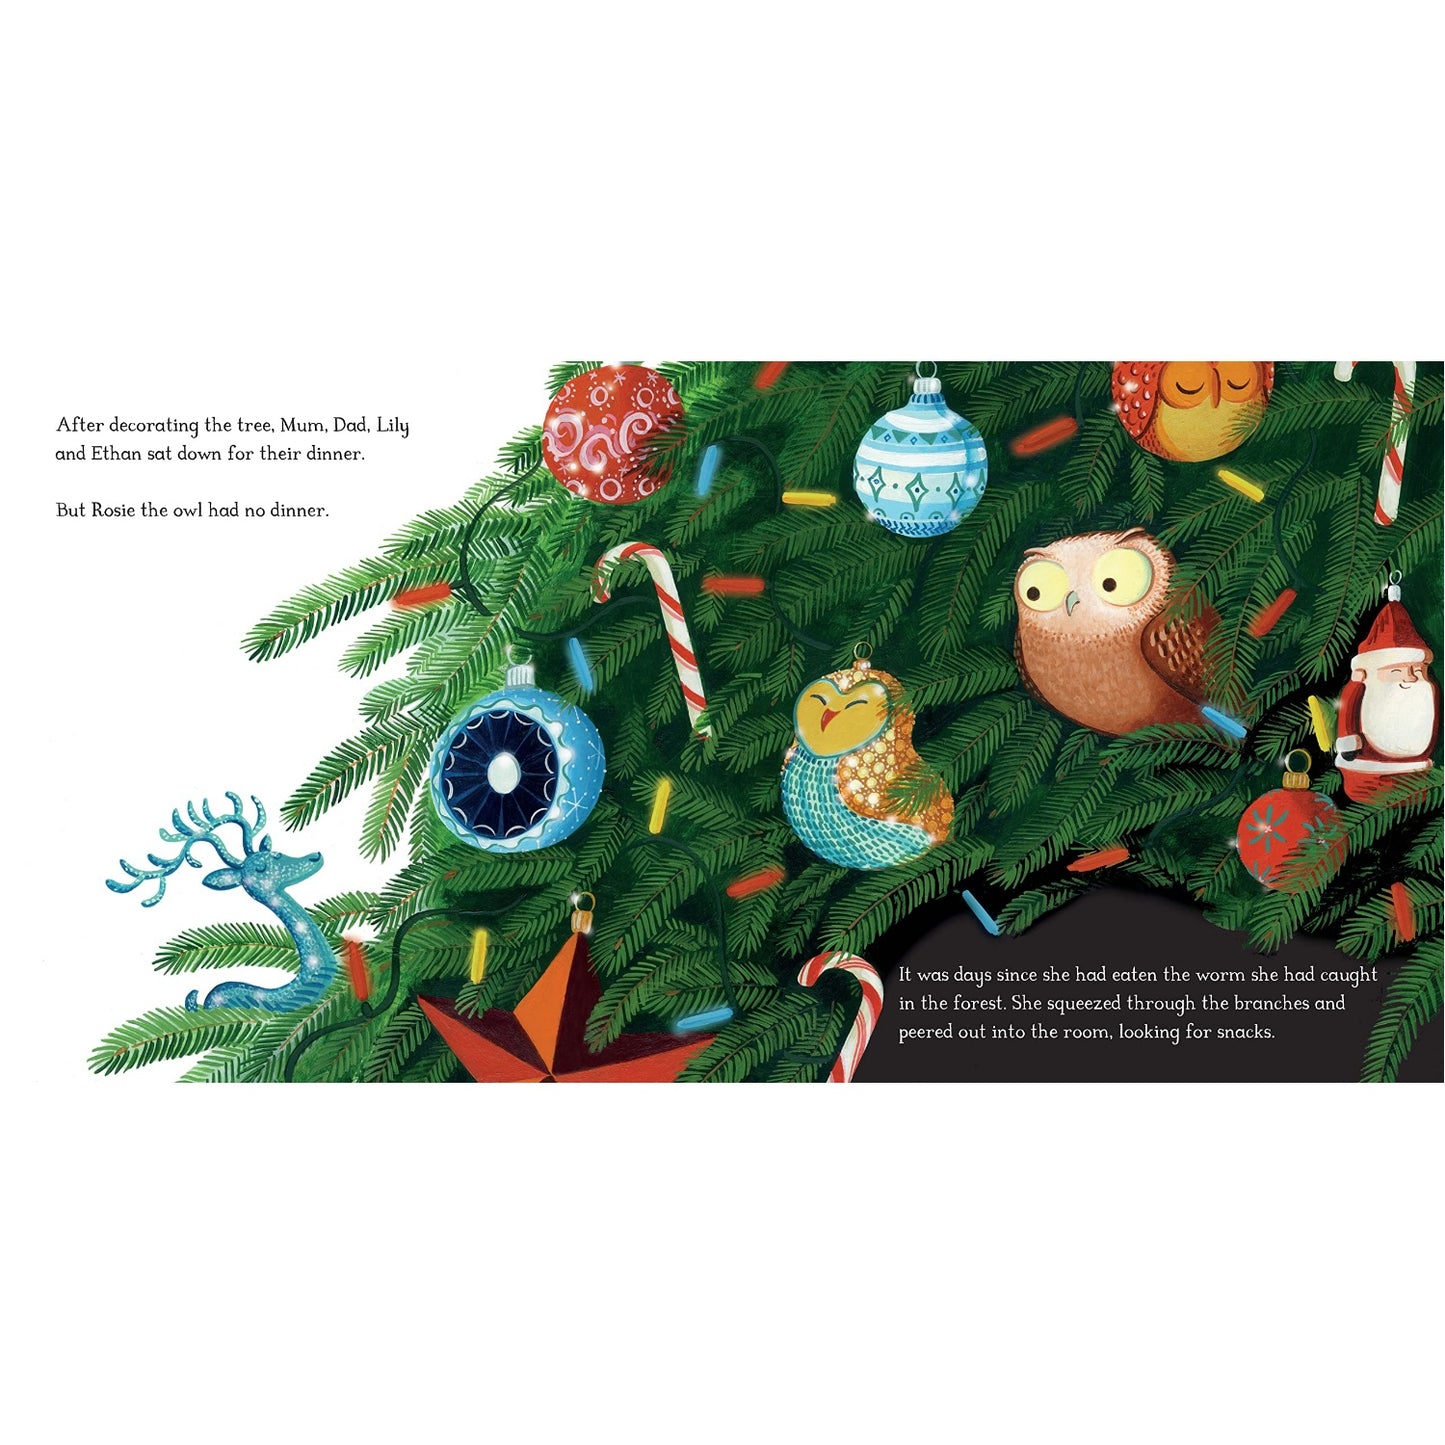 The Owl Who Came for Christmas | Children’s Book